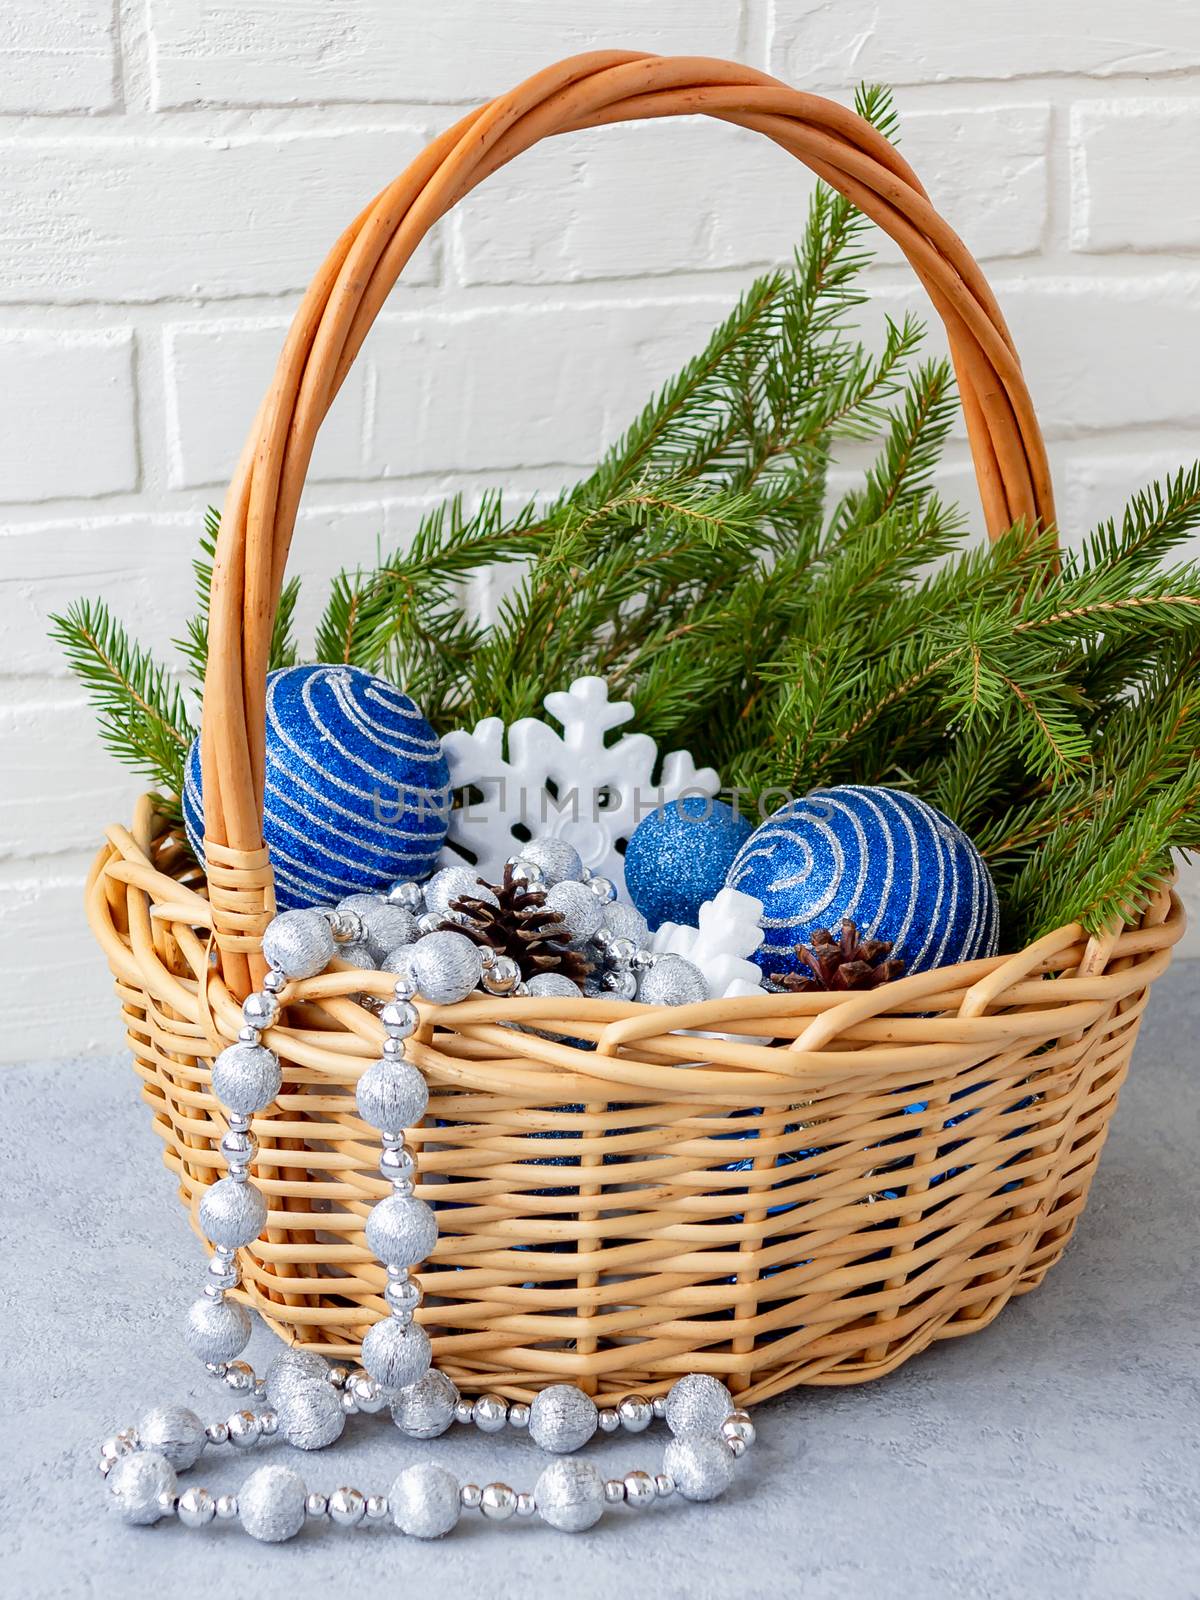 Christmas composition - wicker basket with decorations and fir branches on a light background.